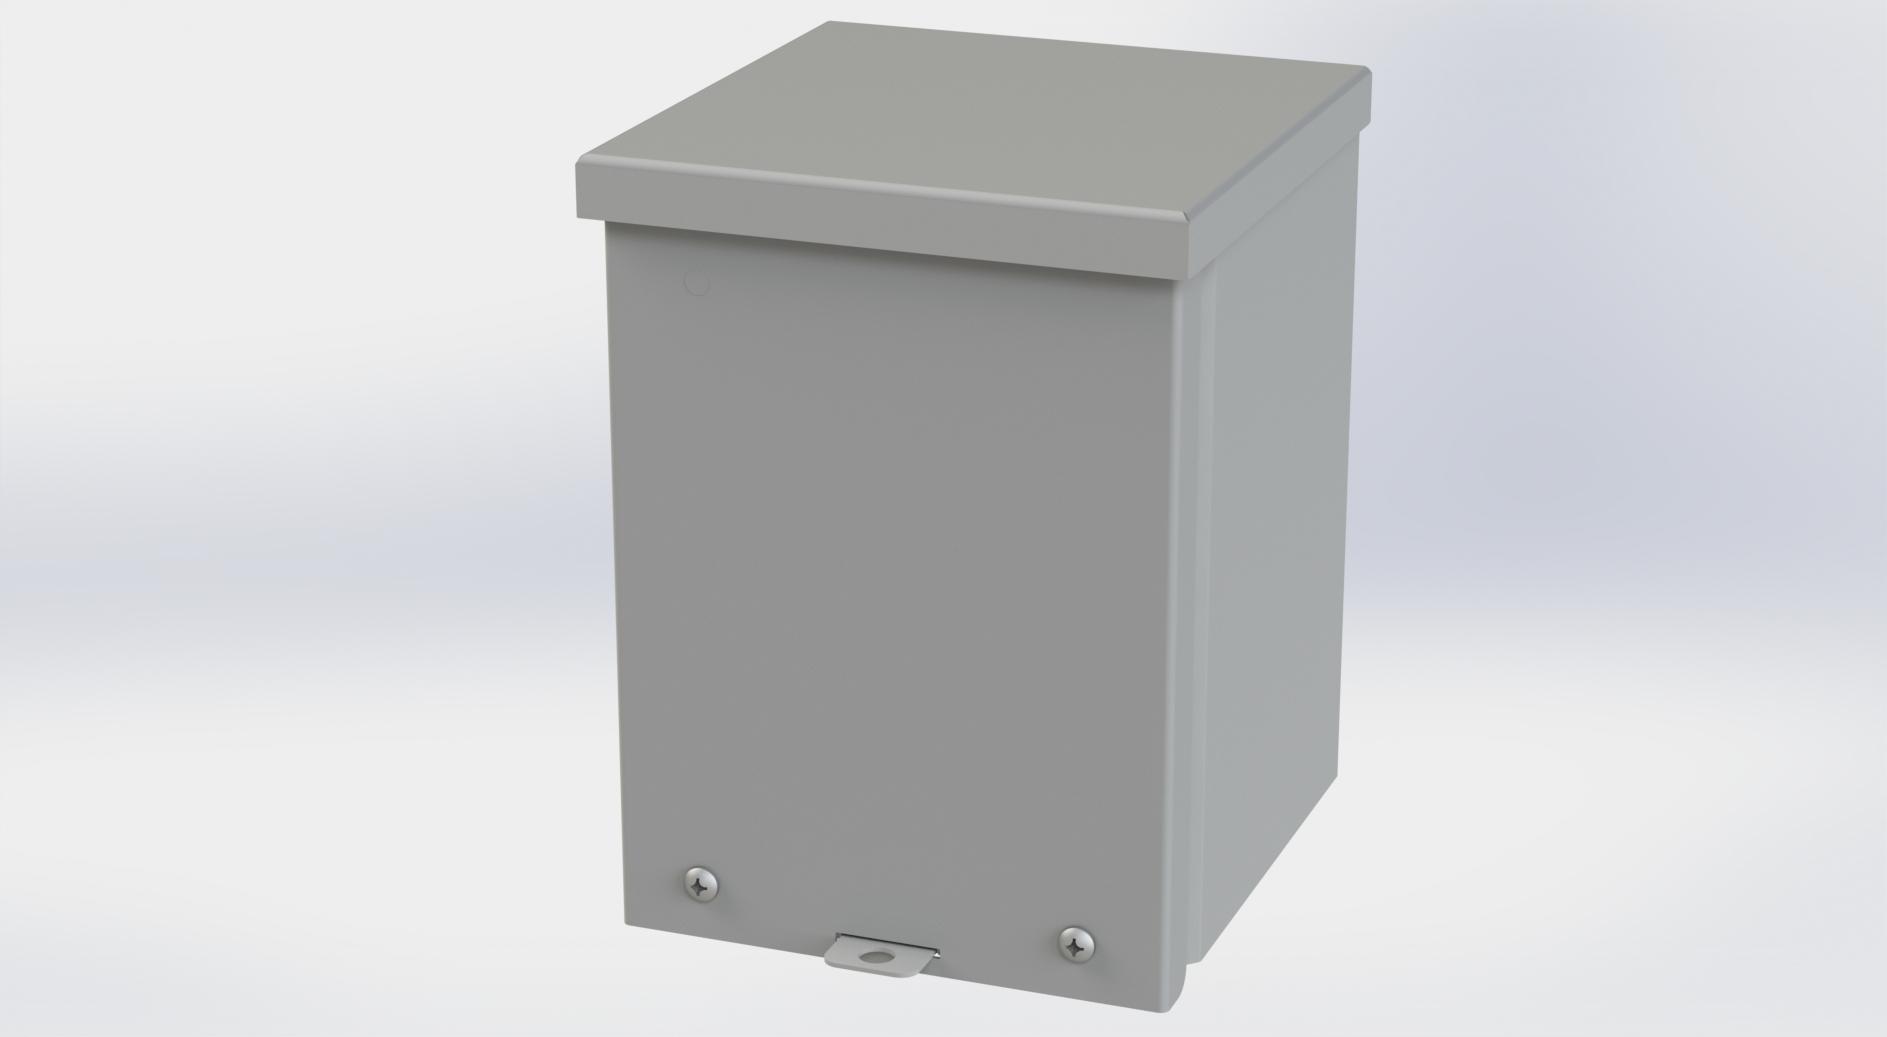 Saginaw Control SCE-8R66 Type-3R Screw Cover Enclosure, Height:8.00", Width:6.00", Depth:6.00", ANSI-61 gray powder coating inside and out.